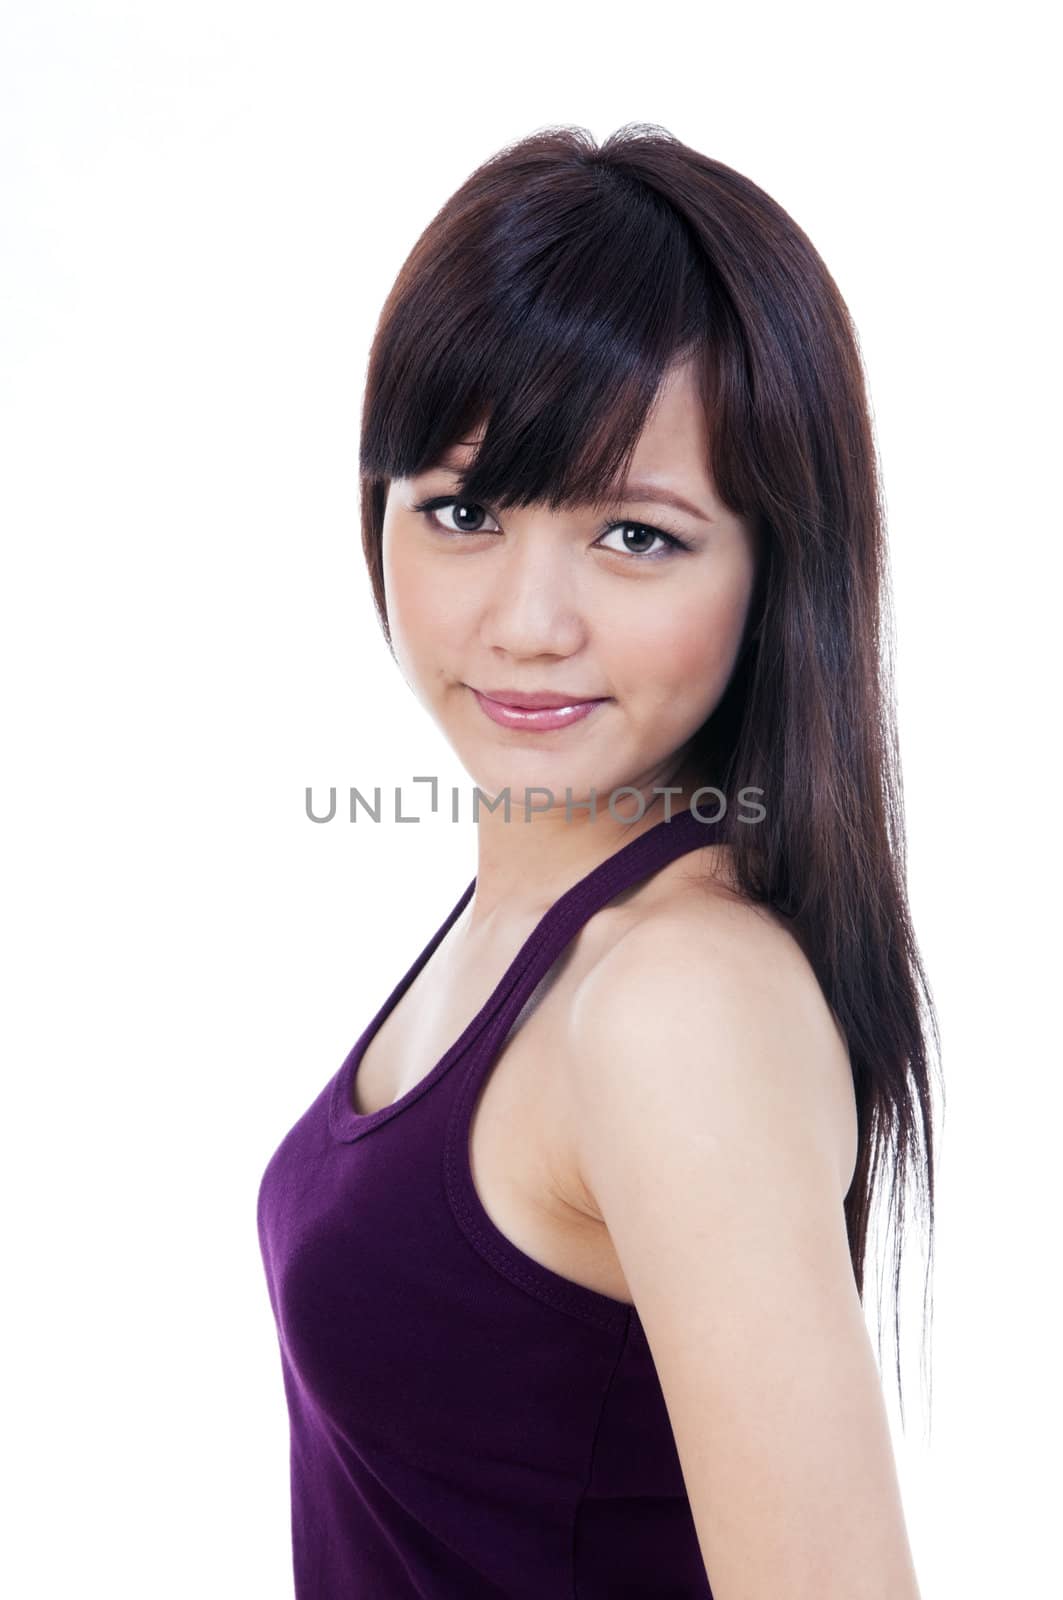 Portrait of an attractive young woman, isolated on white background.